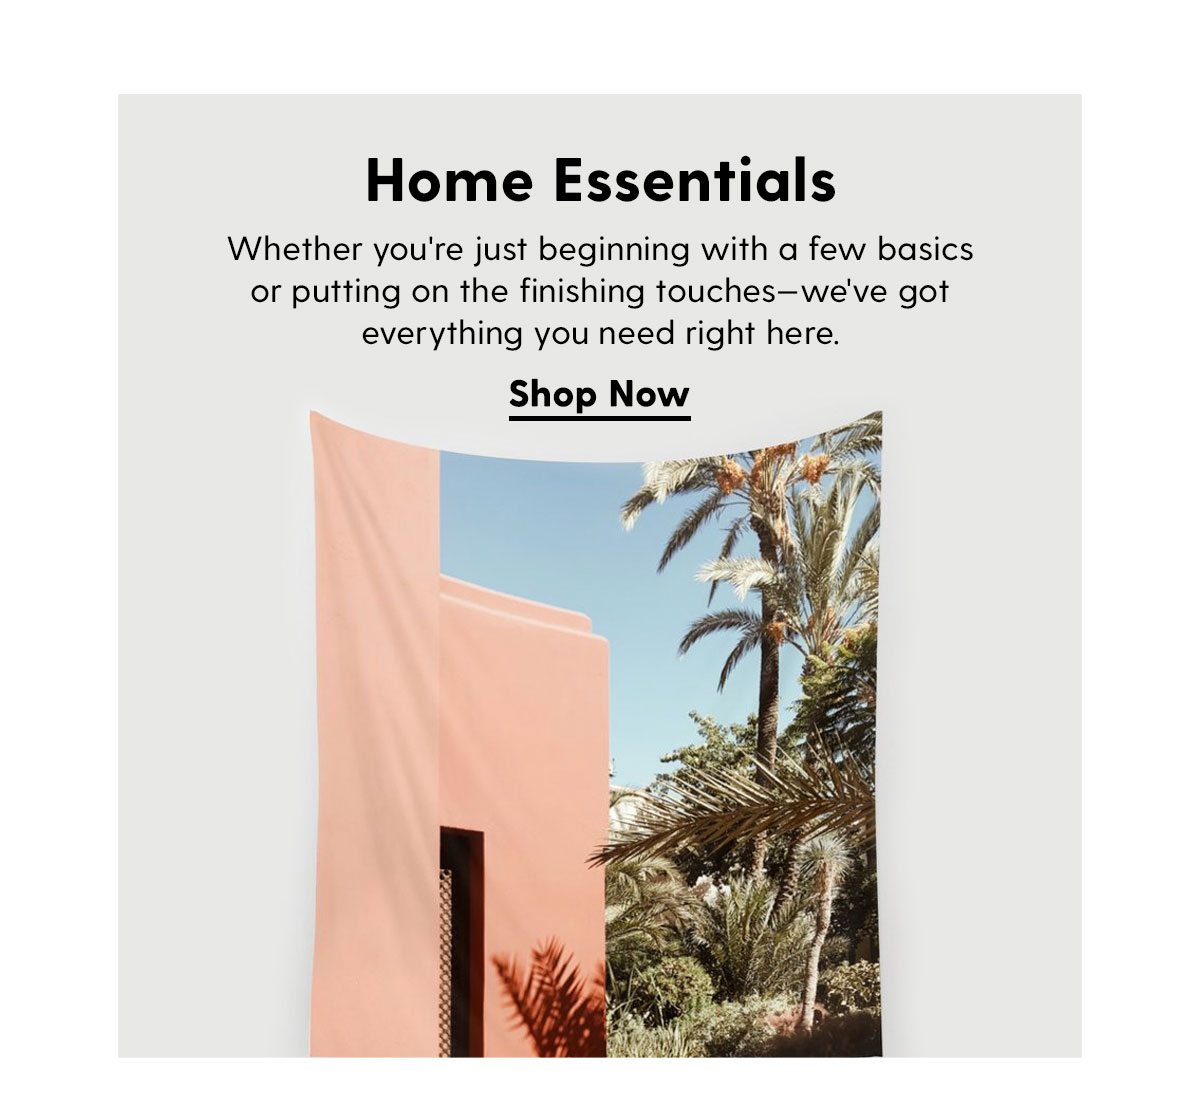 Home Essentials. Whether you're just beginning with a few basics or putting on the finishing touches—we've got everything you need right here. Shop Now →